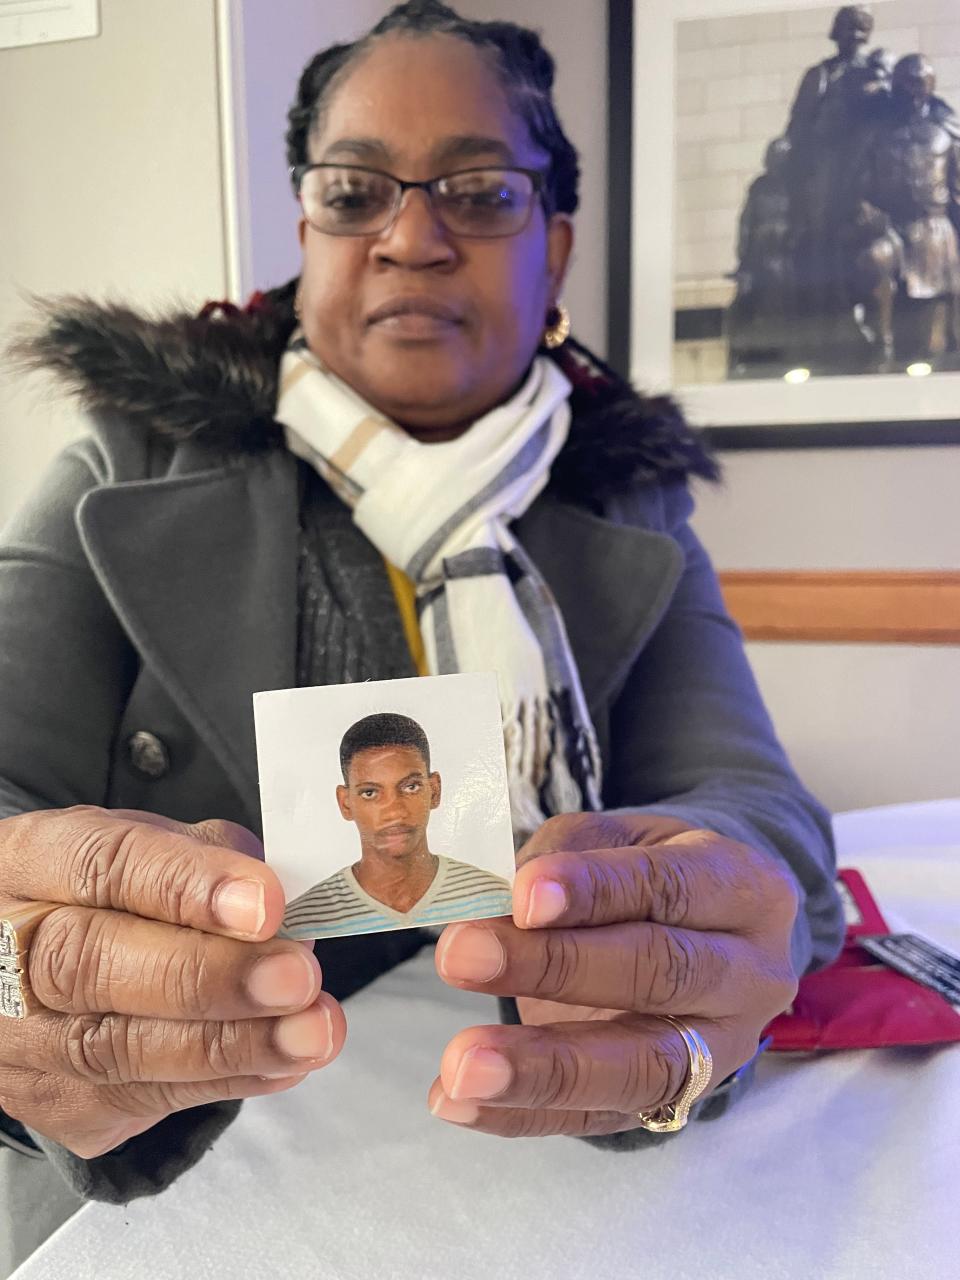 Marsha Thompson, mother of Hakeem Thompson, the Norwich resident severely injured in an October crash in Plainfield allegedly involving state police.